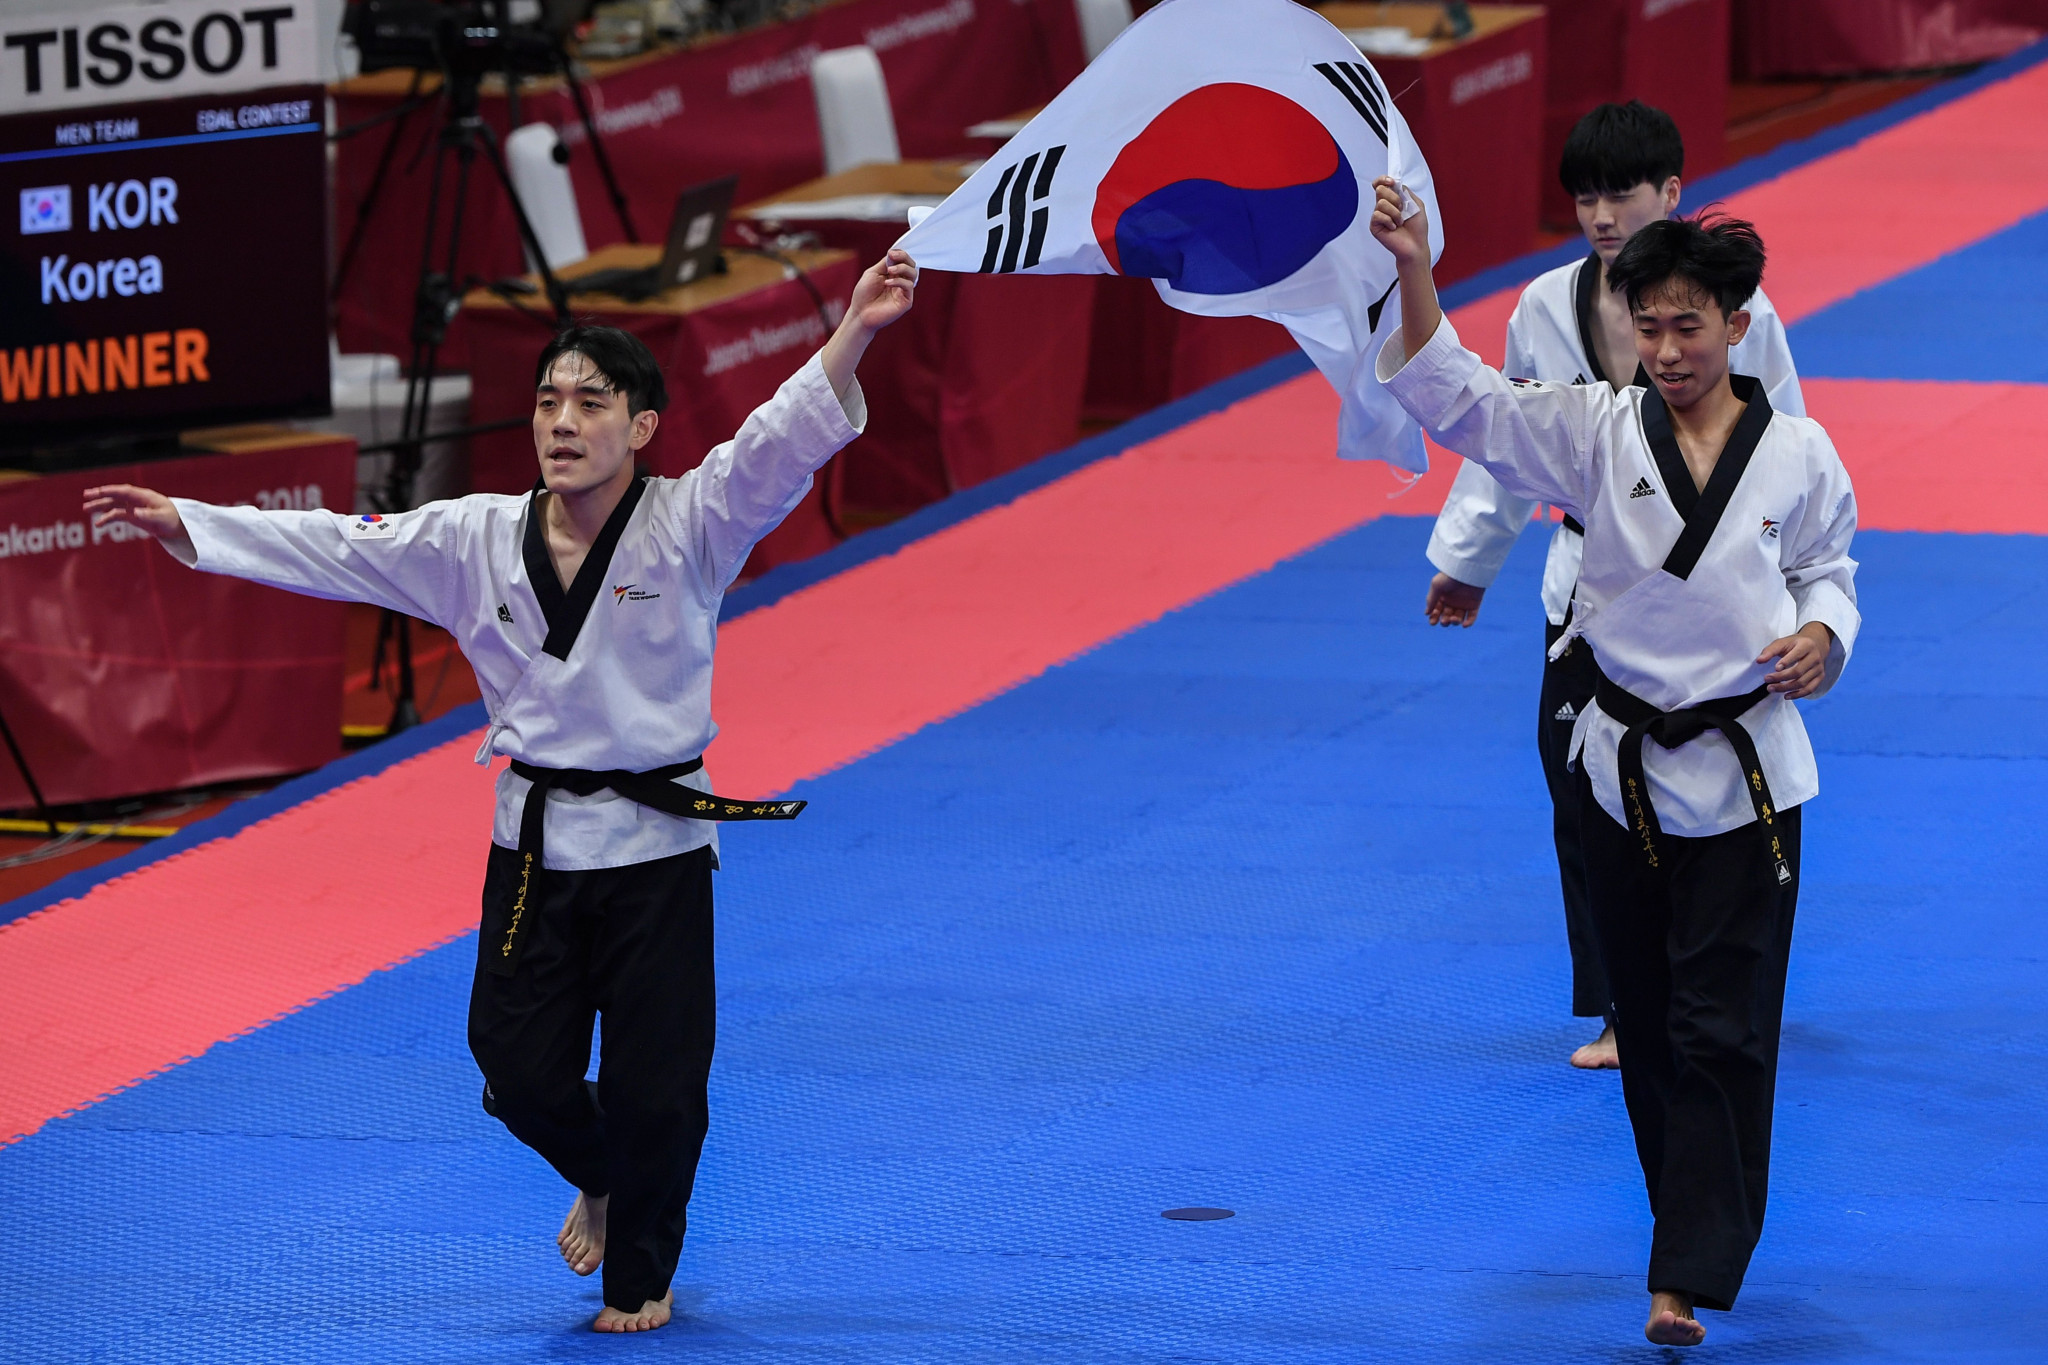 South Korea works to spread taekwondo around the world in a bid to promote its culture ©Getty Images